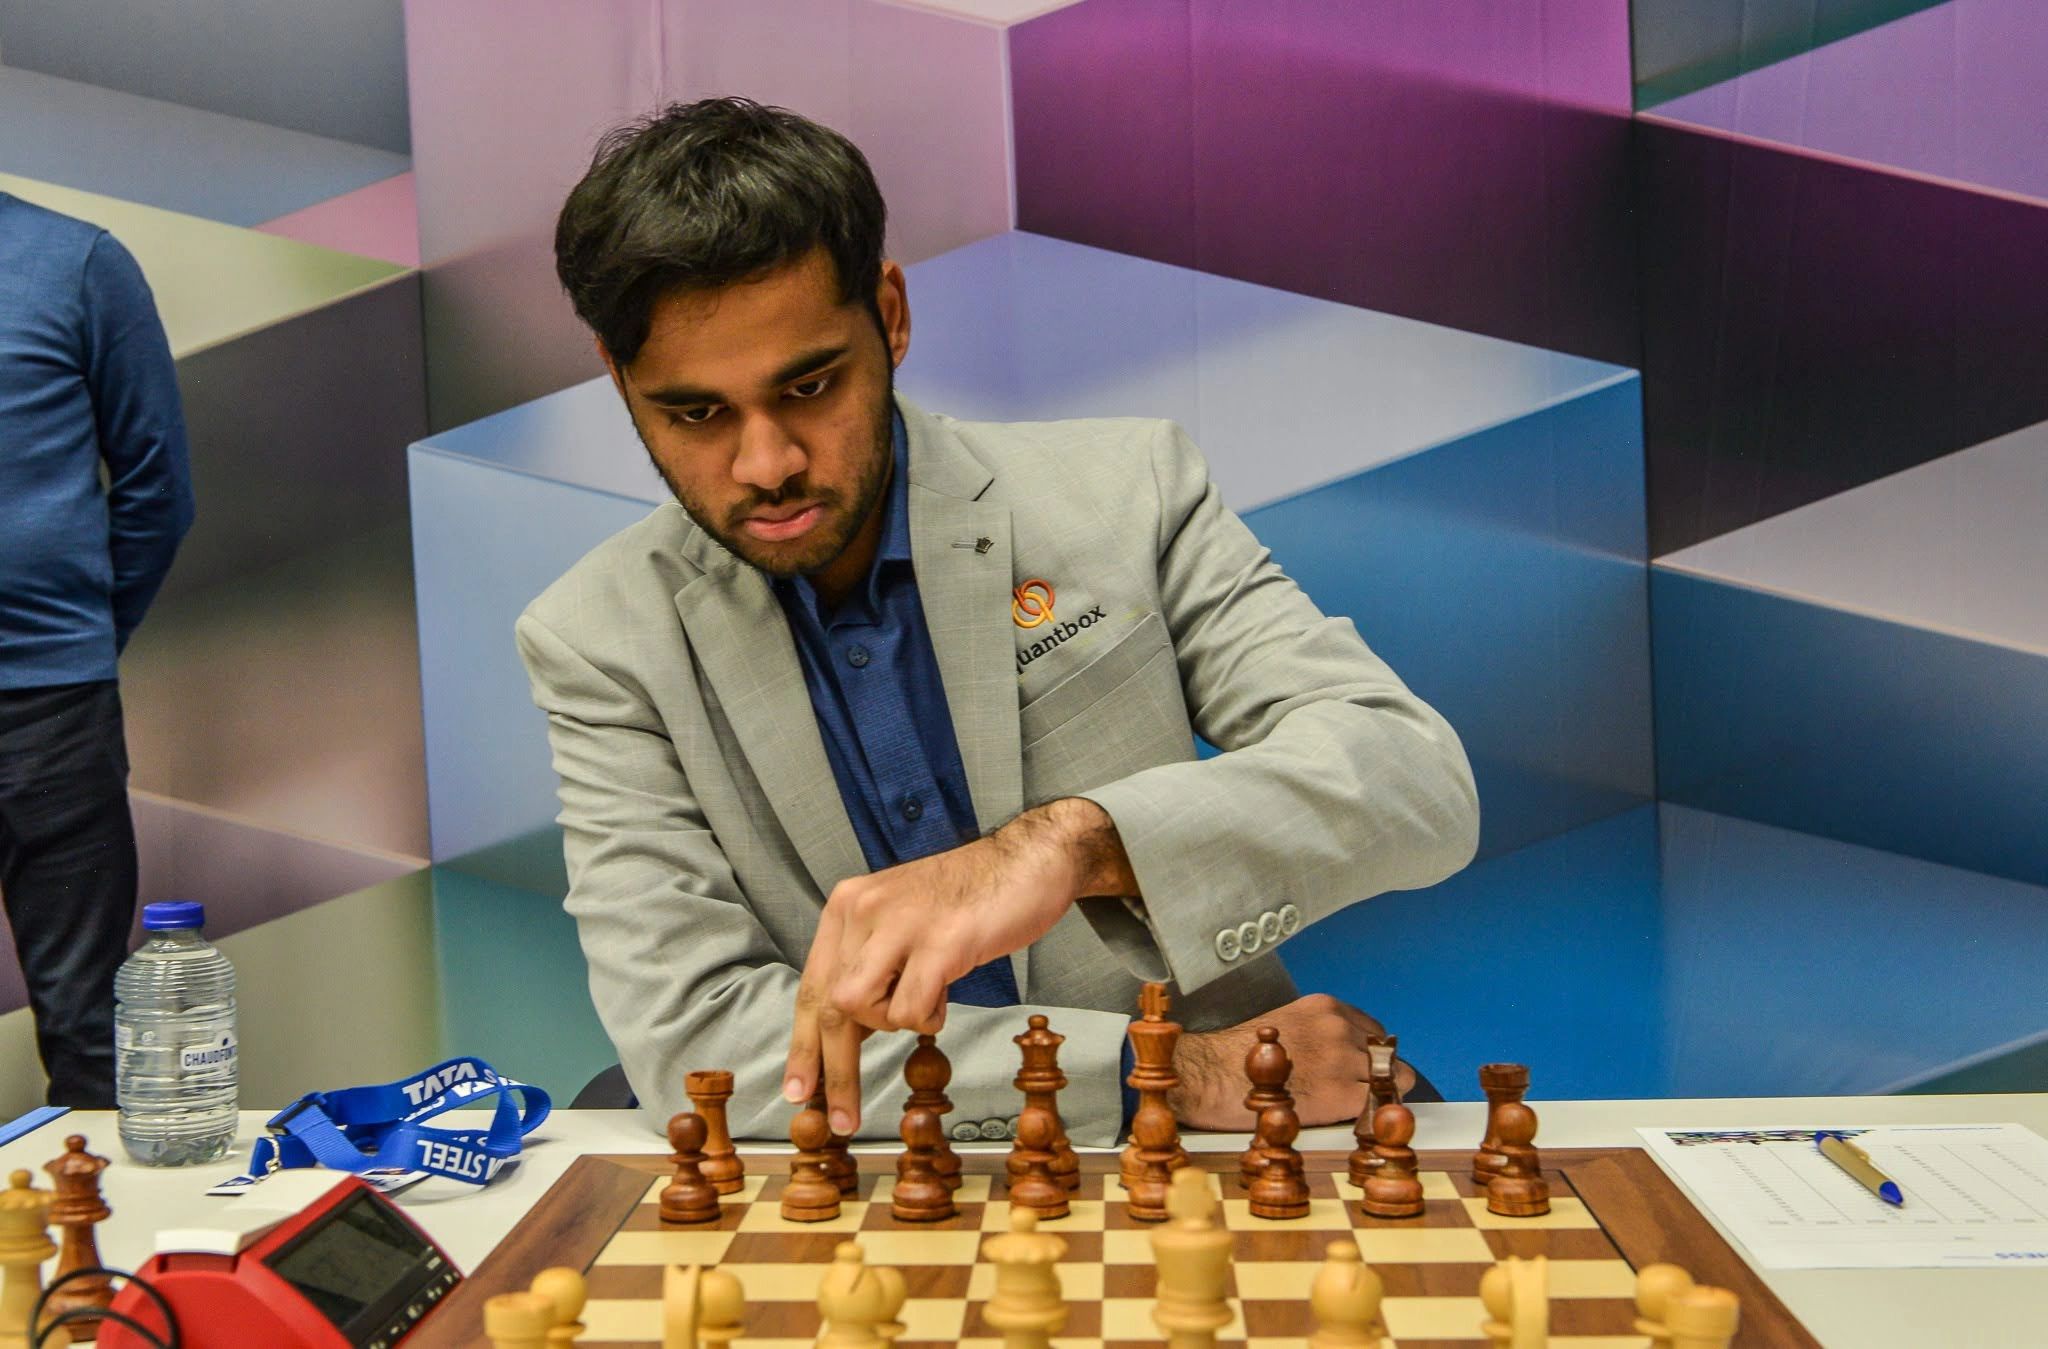 Tata Steel Chess - ♟ 2023 Tata Steel Challengers 3/14 The third player in  the challengers is Luis Paulo Supi! The No. 1 player in Brazil will be the  first in Wijk